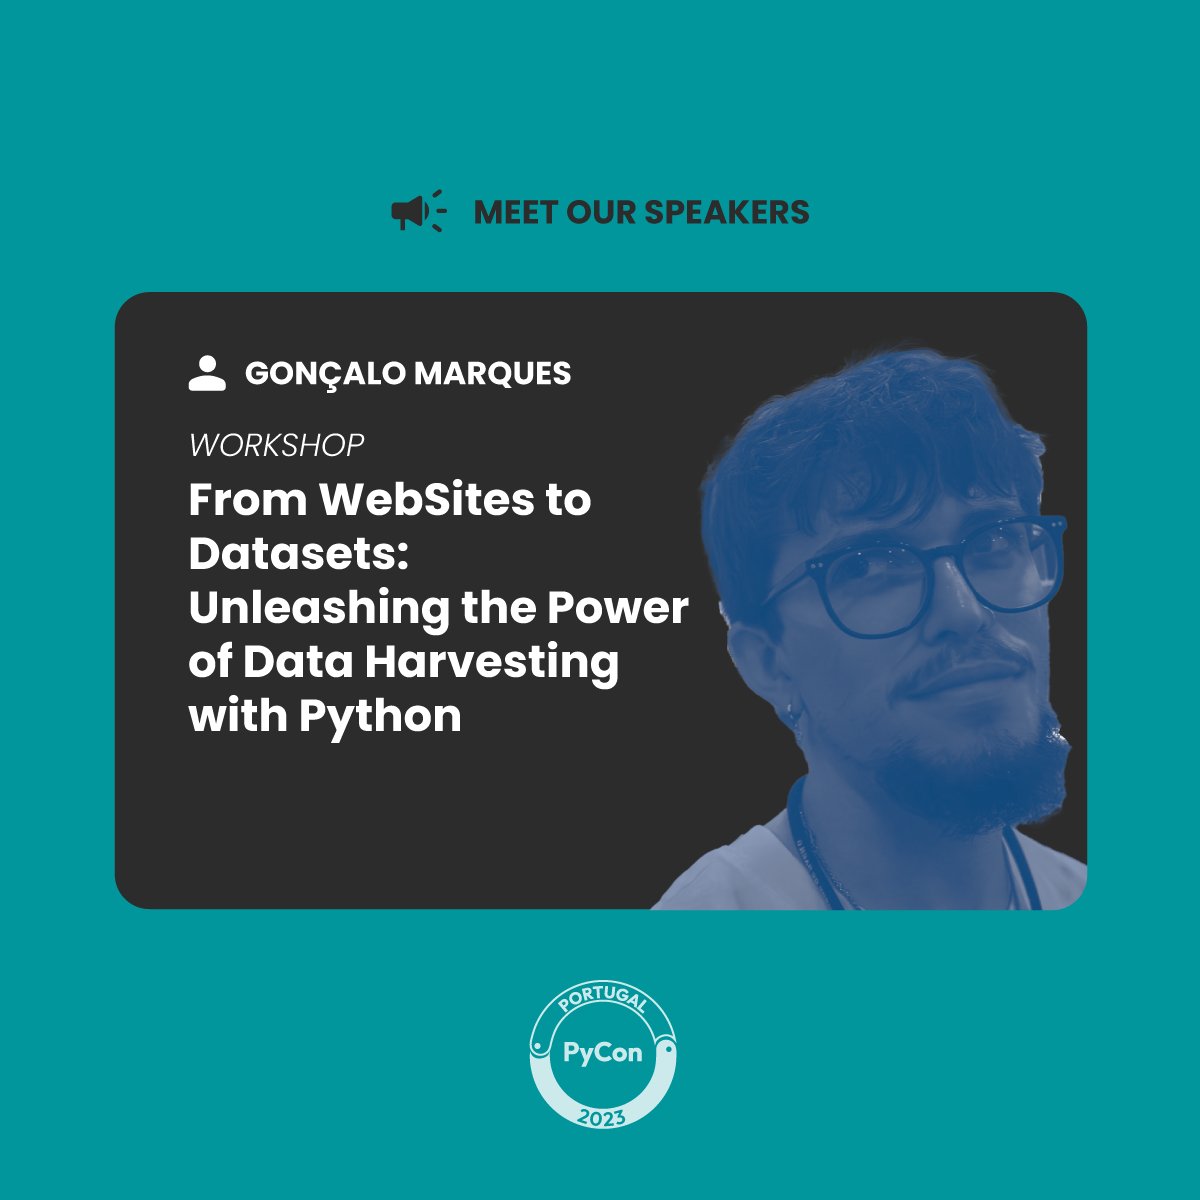 🌐 Unlock the power of data harvesting at 2:30 PM! 🗓️

Join us for the workshop 'From Websites to Datasets: Unleashing the Power of Data Harvesting with Python' by Gonçalo Marques. 🚀 🐍

#pyconpt23 #dataharvesting #python #workshop